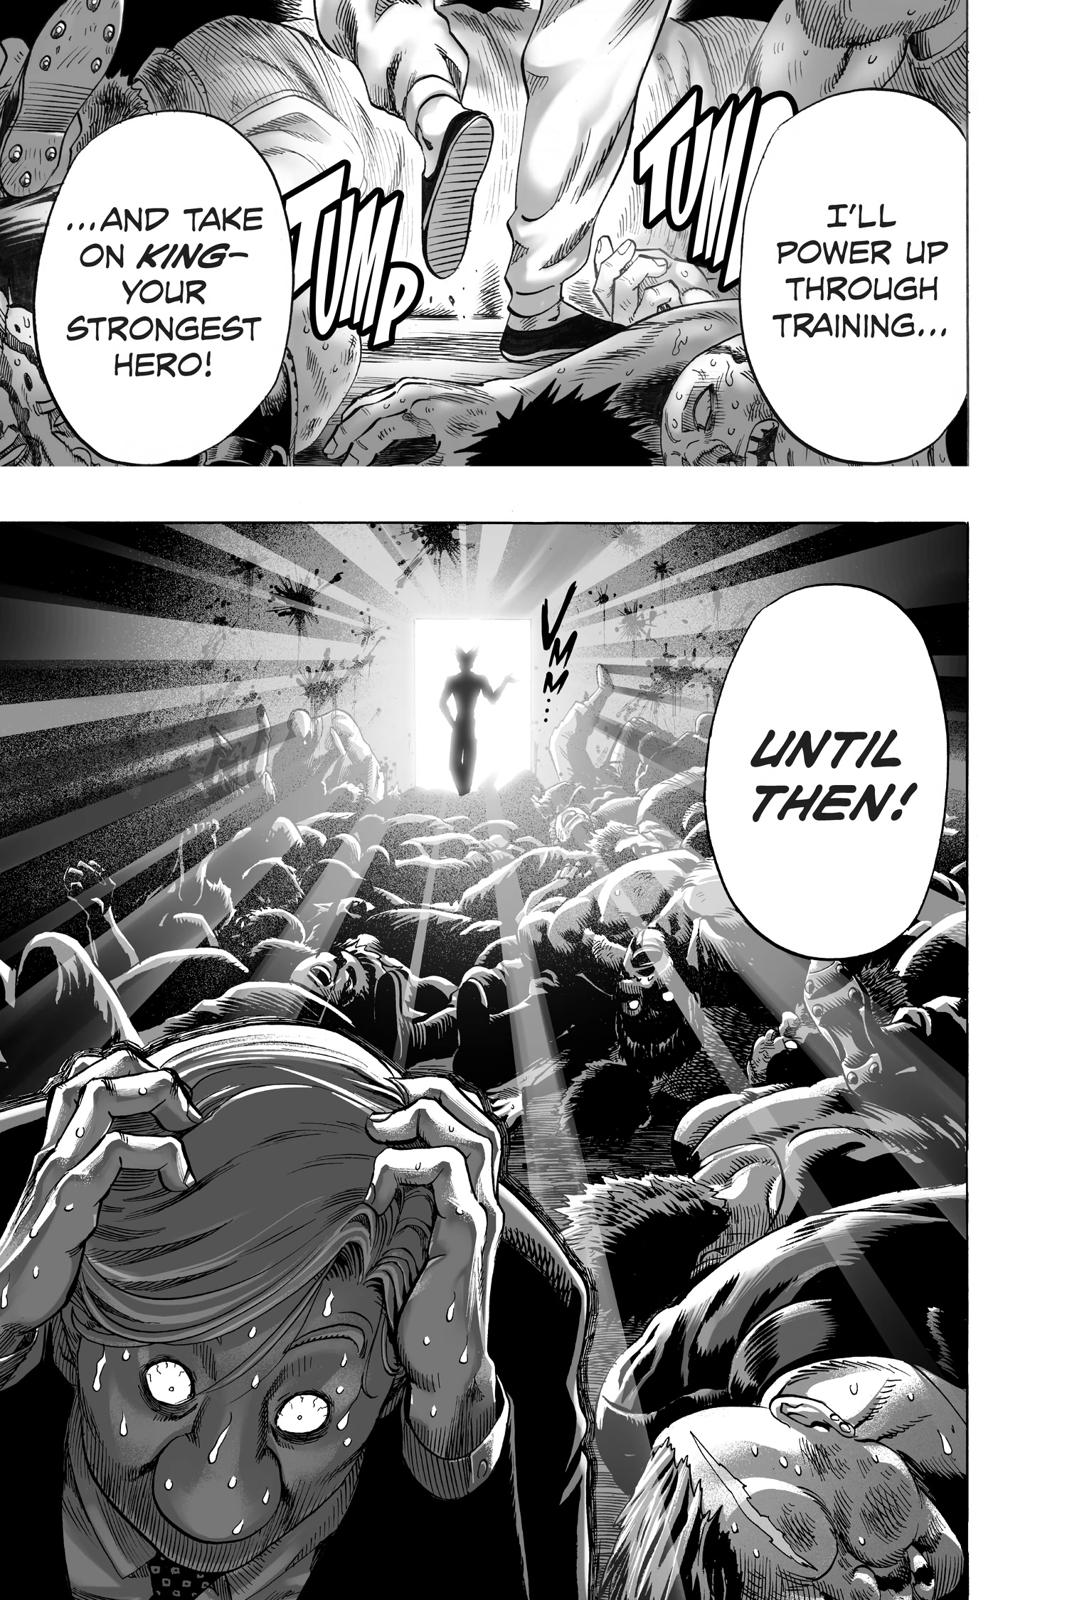 One-Punch Man, Punch 41 image 32